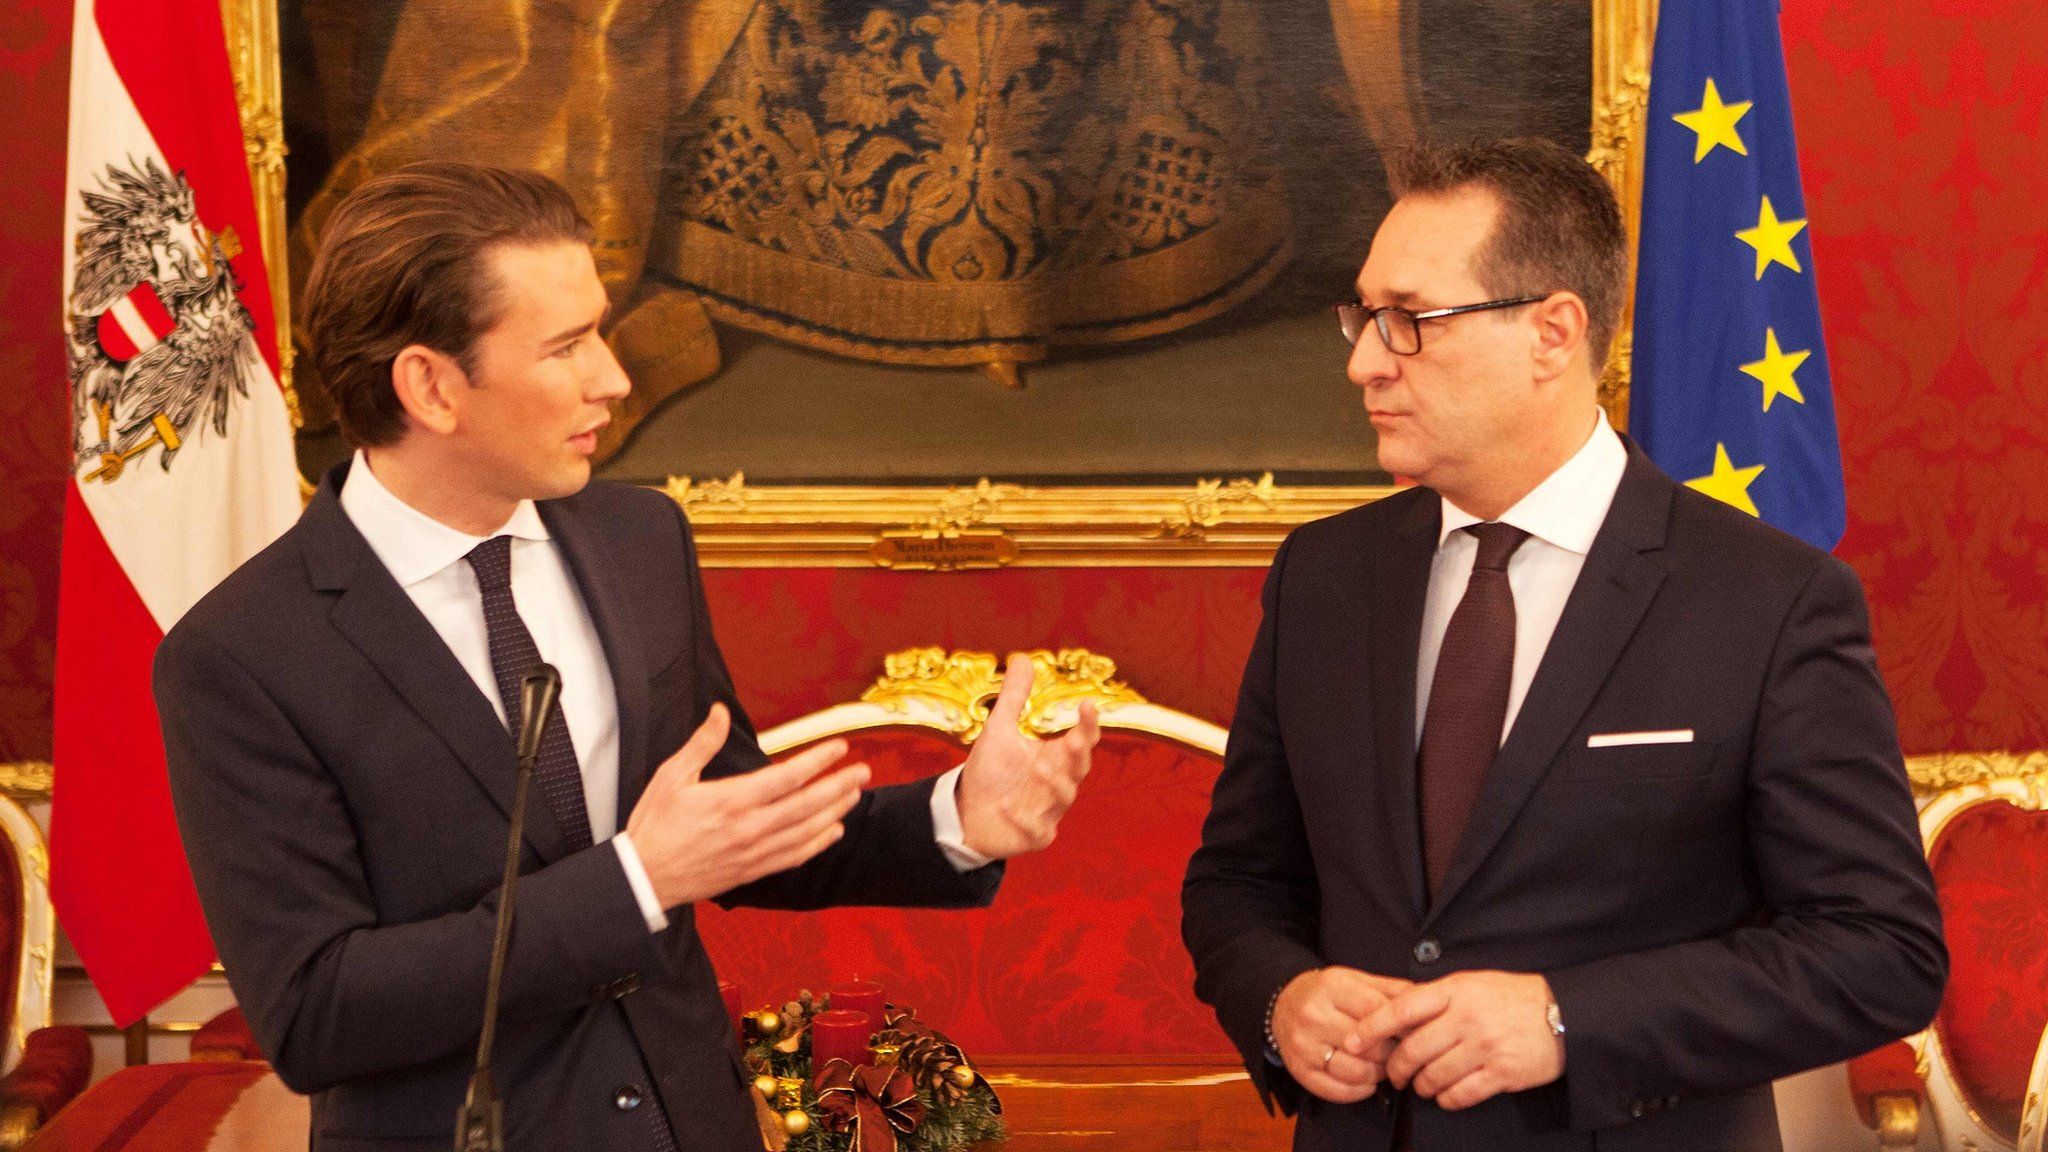 Leader of Austria's conservative People's Party (OeVP), Sebastian Kurz (L) and the Chairman of the Freedom Party (FPOe), Heinz-Christian Strache give a press conference after talks at the Hofburg in Vienna, 16 December 2017.